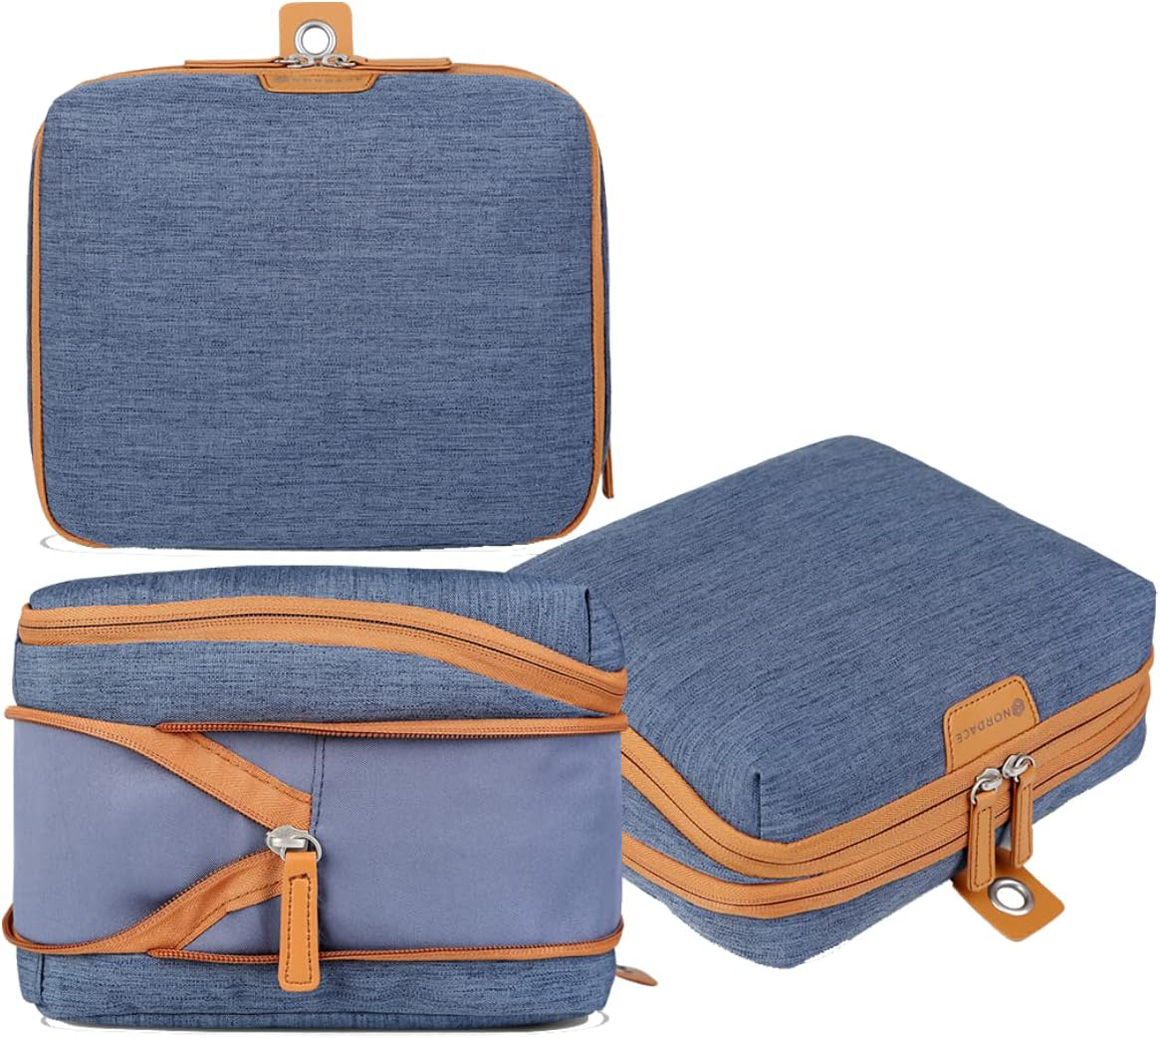 Pack-It-All Bundle: 2x Packing Cubes & 1x Wash Pouch